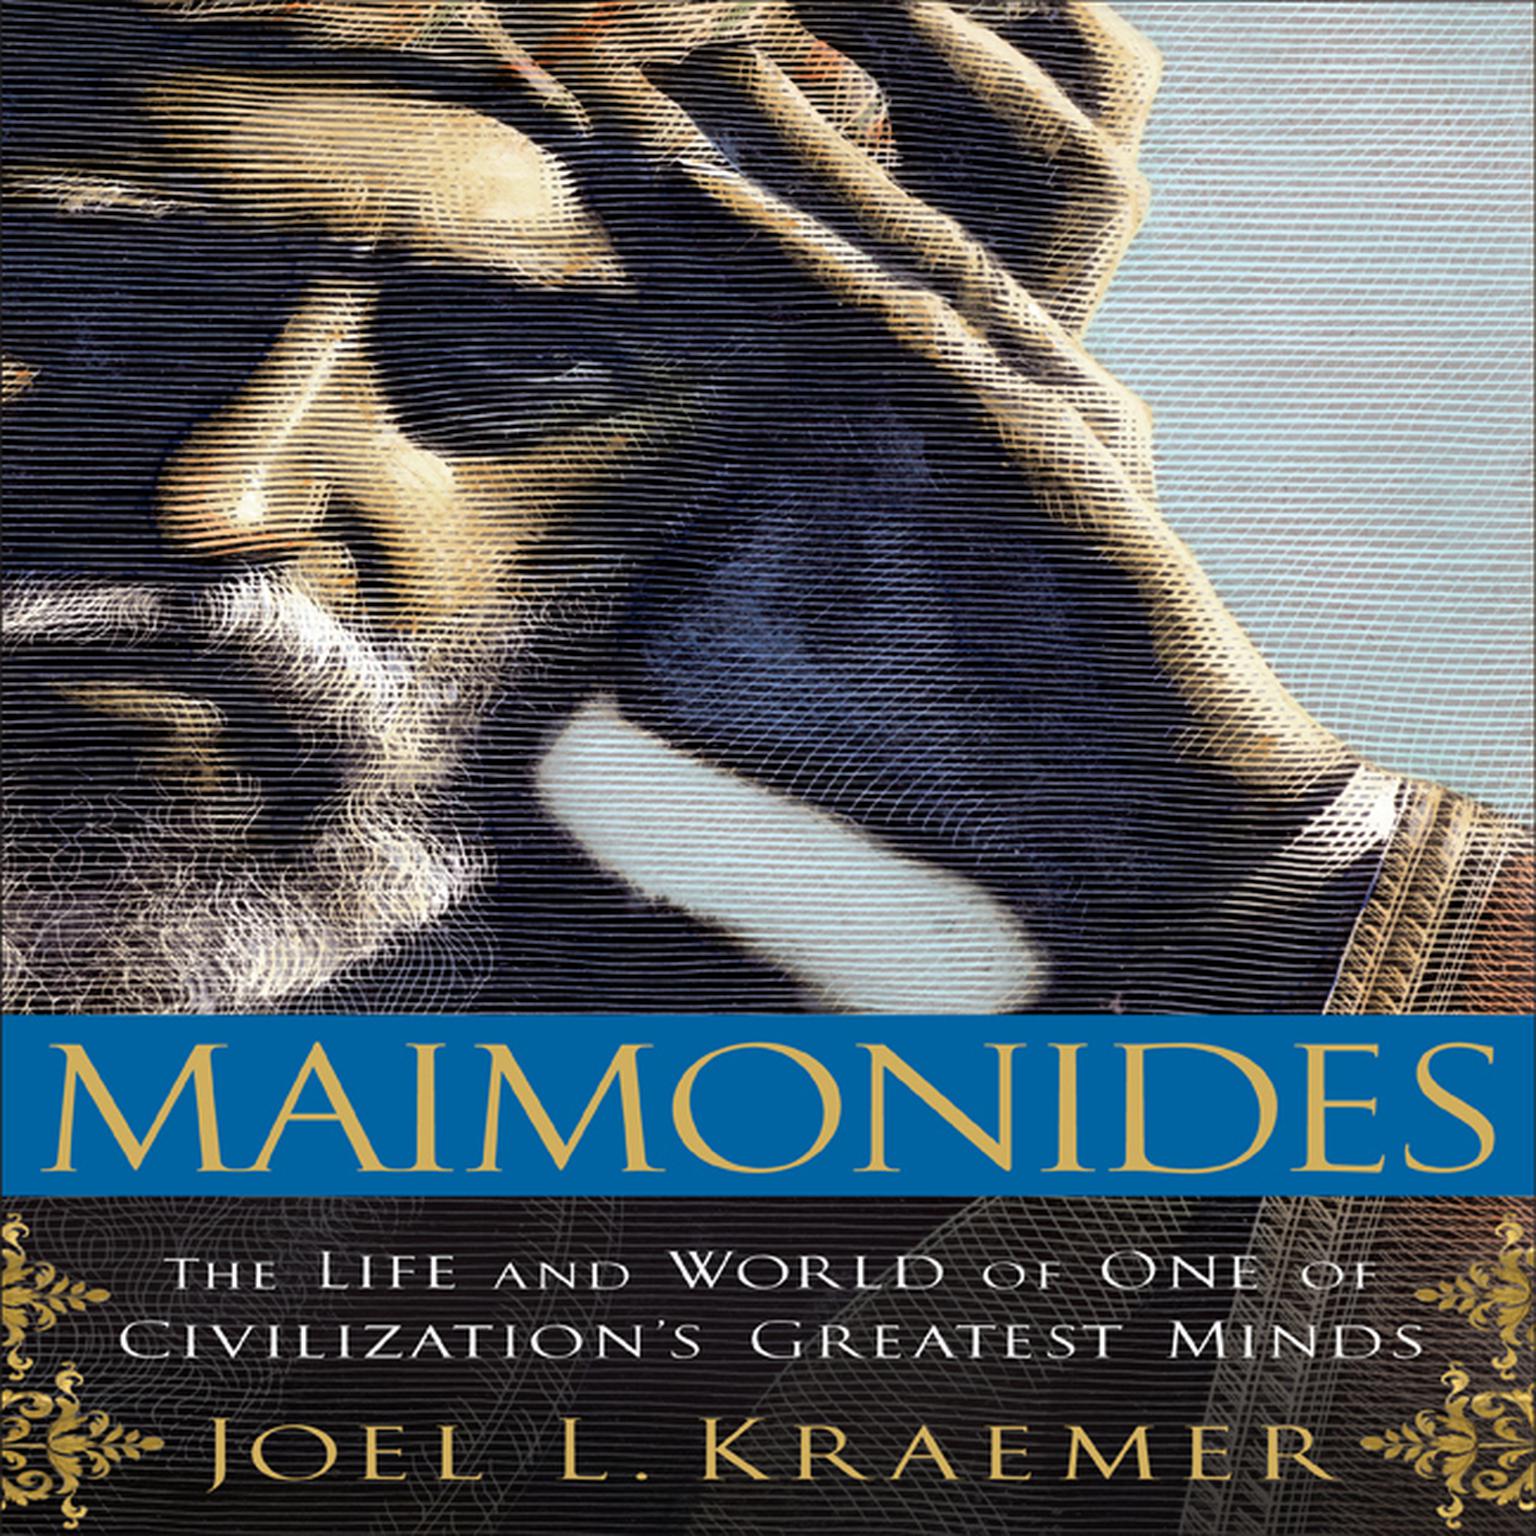 Maimonides: The Life and World of One of Civilizations Greatest Minds Audiobook, by Joel L. Kraemer